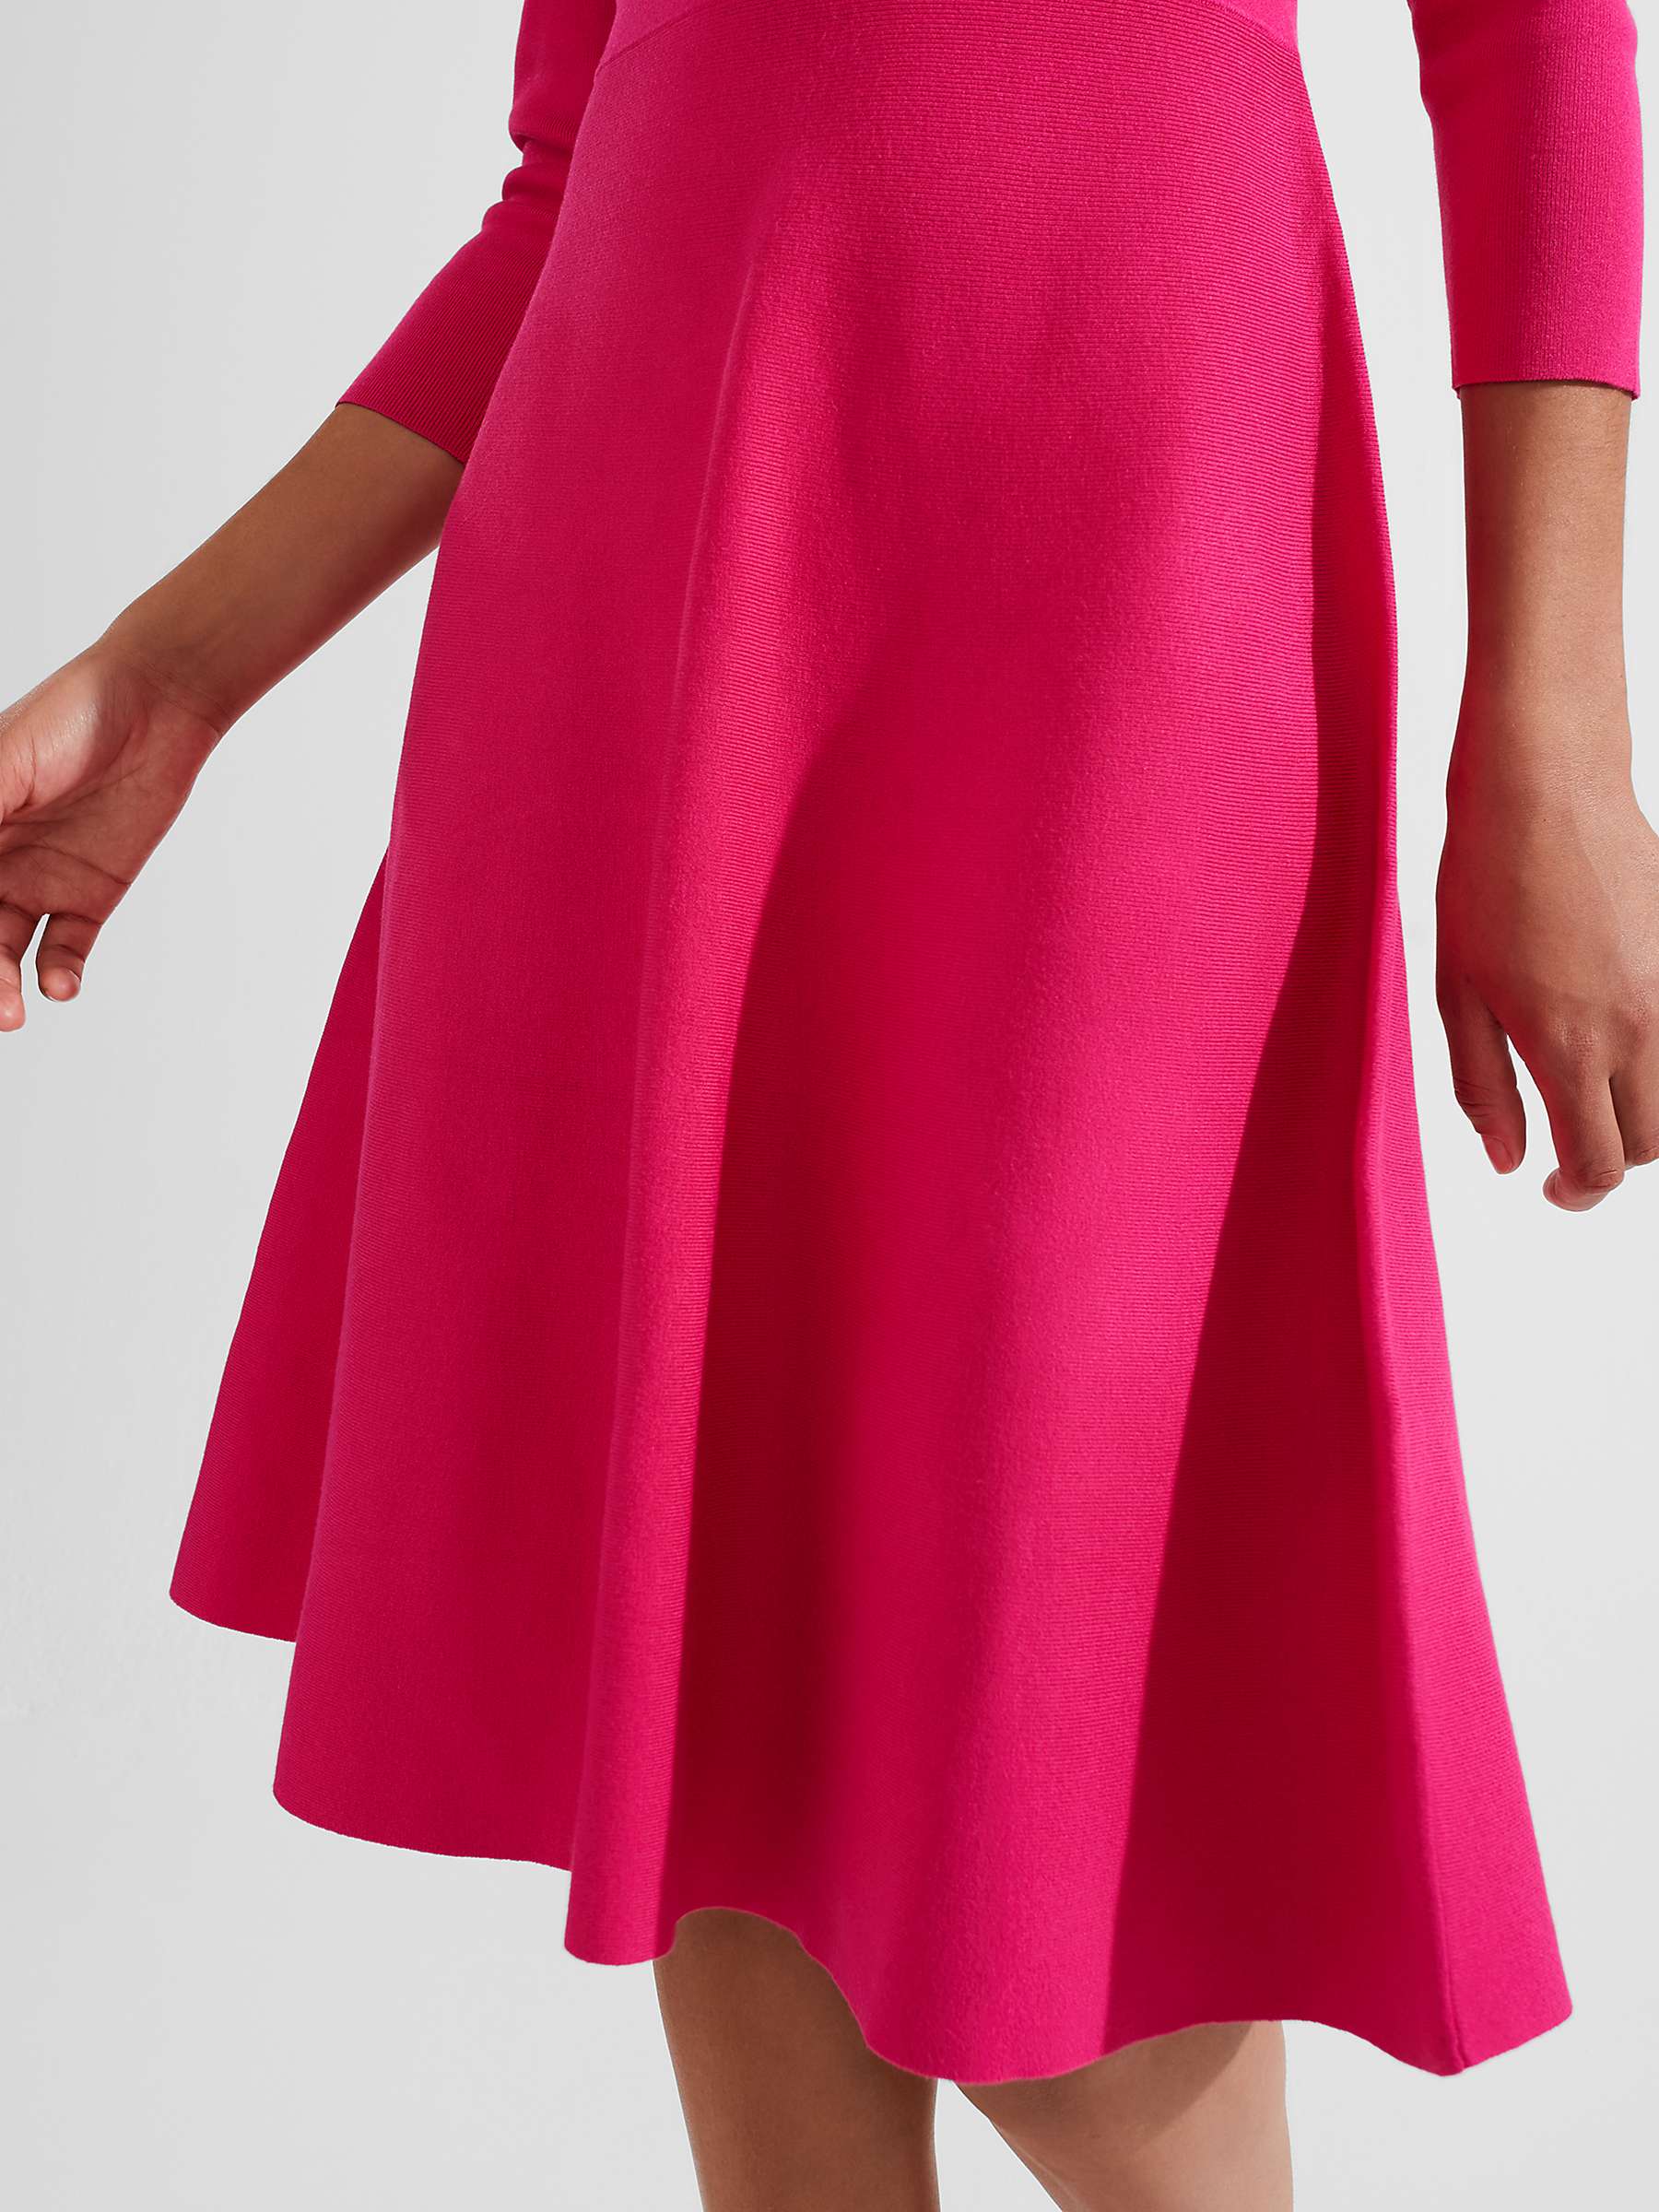 Buy Hobbs Hailey Knitted Dress, Sapphire Pink Online at johnlewis.com